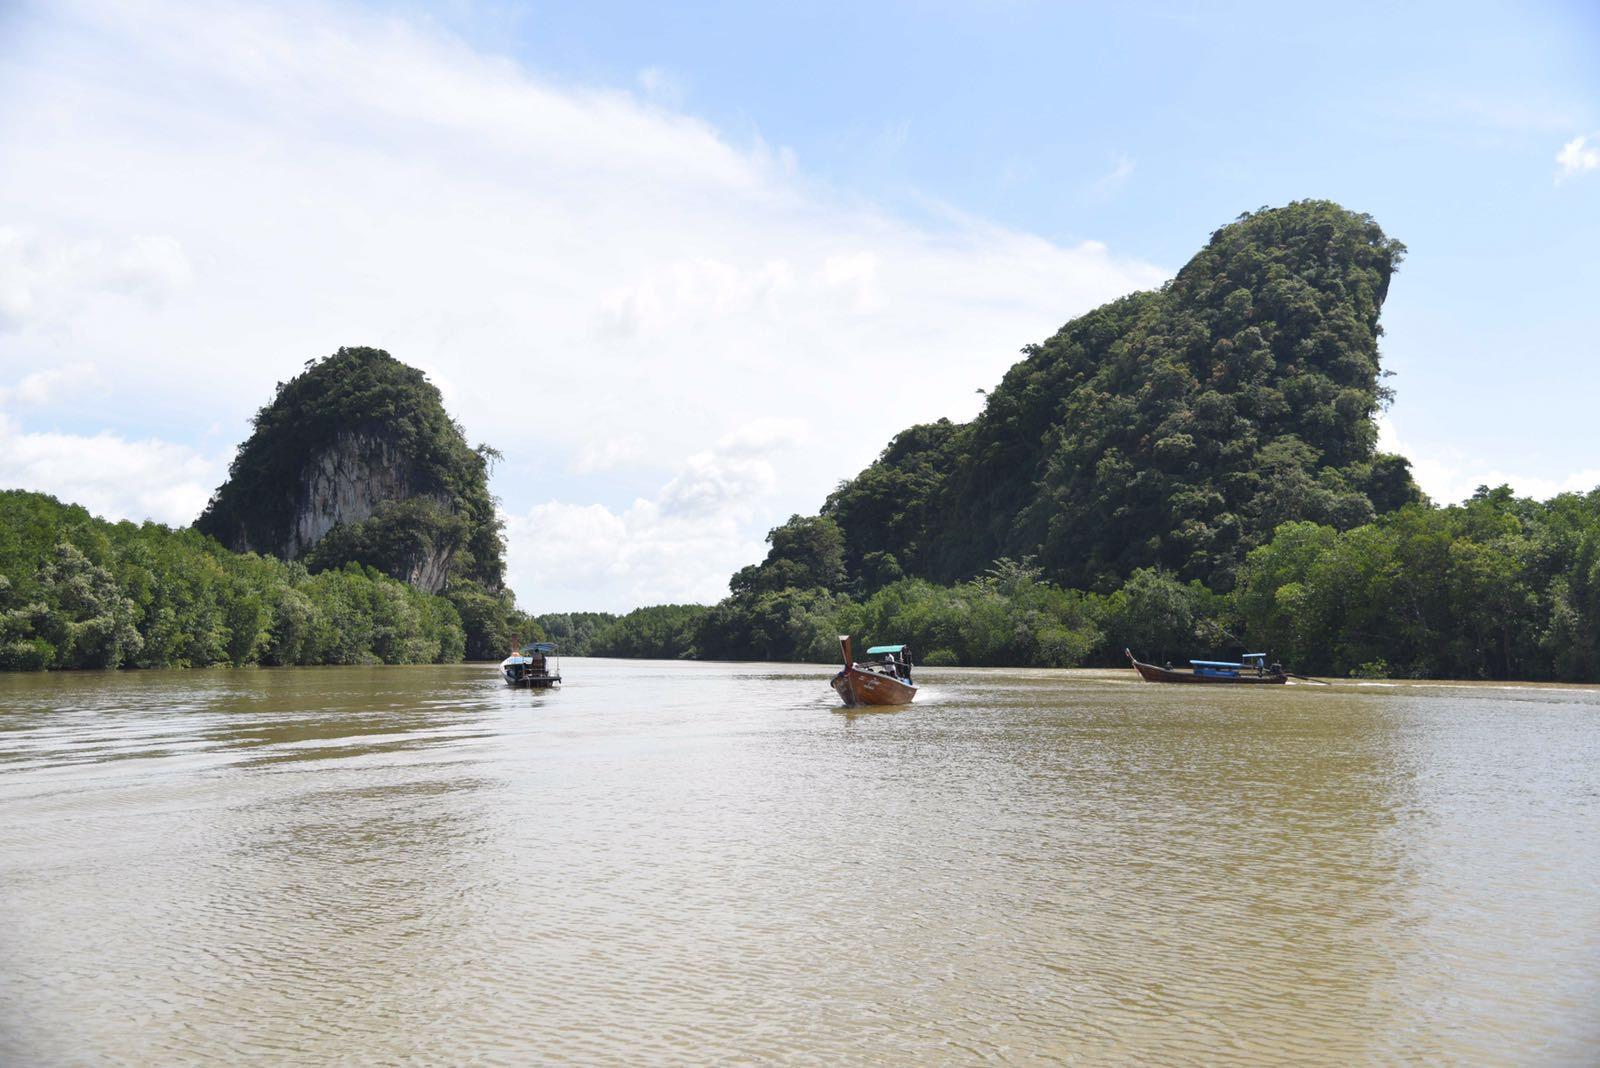 Before making your way to Koh Klang through the mangrove forrests, Khao Khanap Nam offers a unique sense on how mother nature works in mysterious ways. Photo: Supawas Inthip/Thai AirAsia.